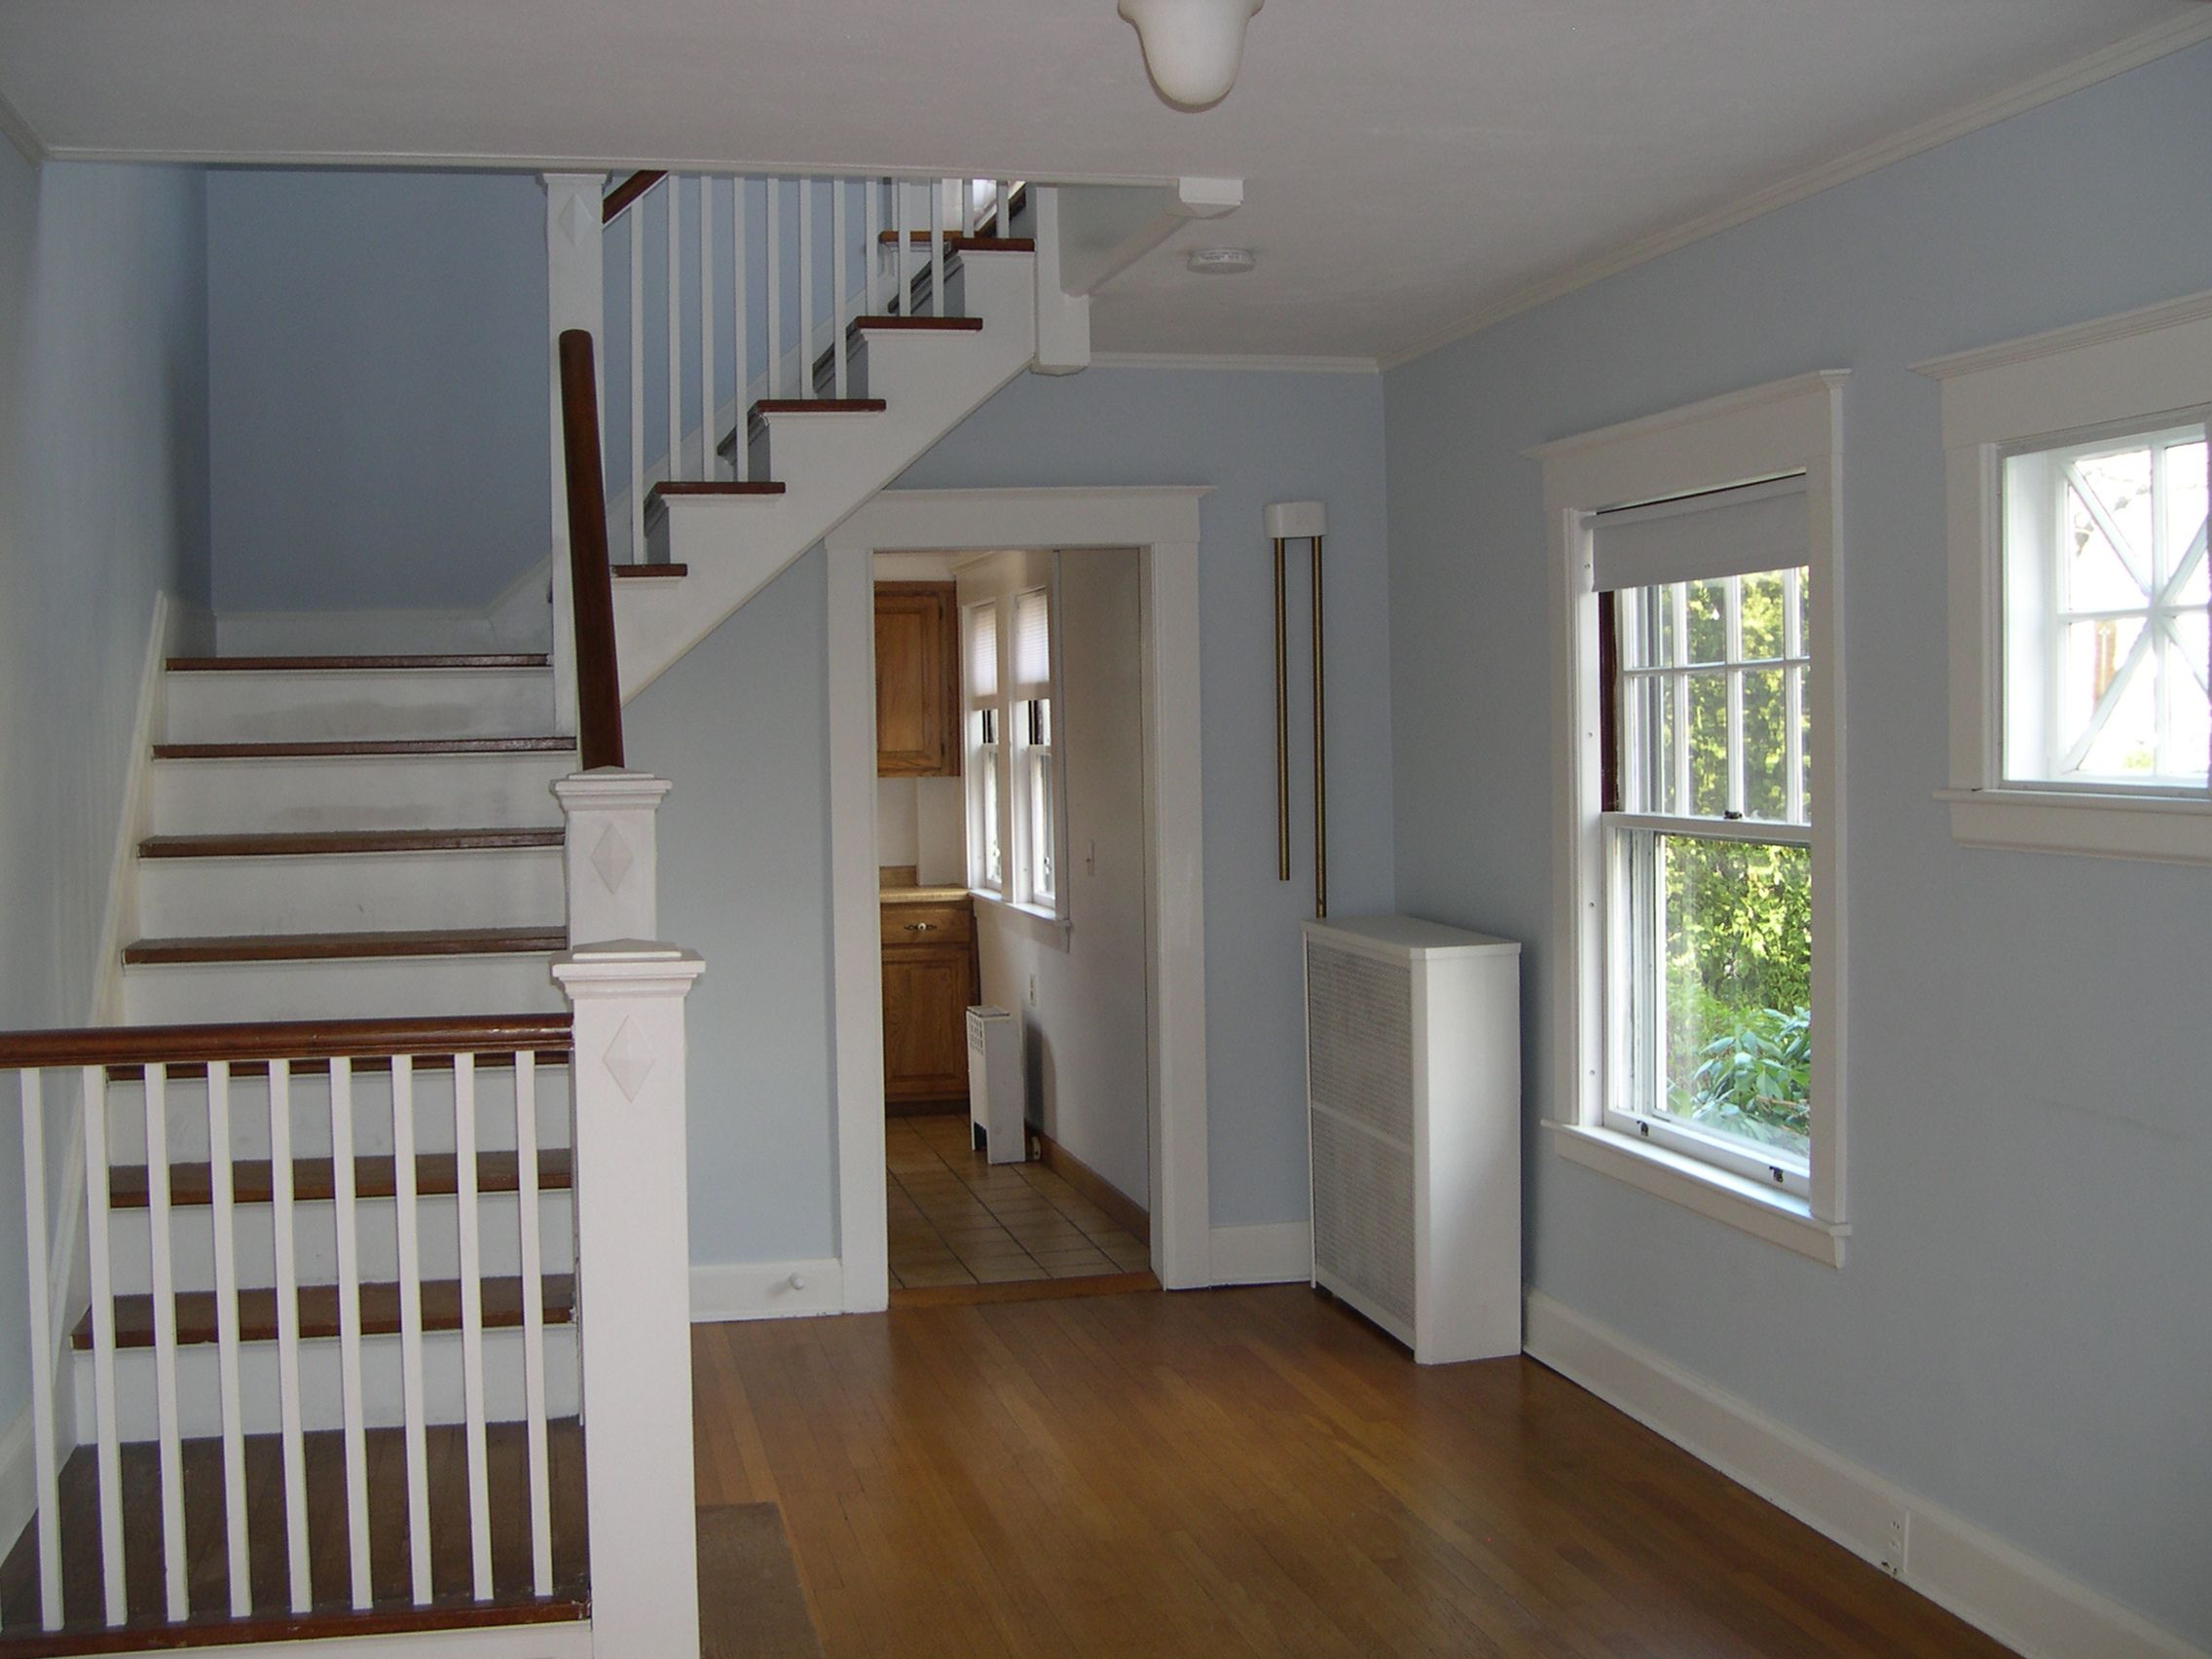 Front hall, before (Dec '05).